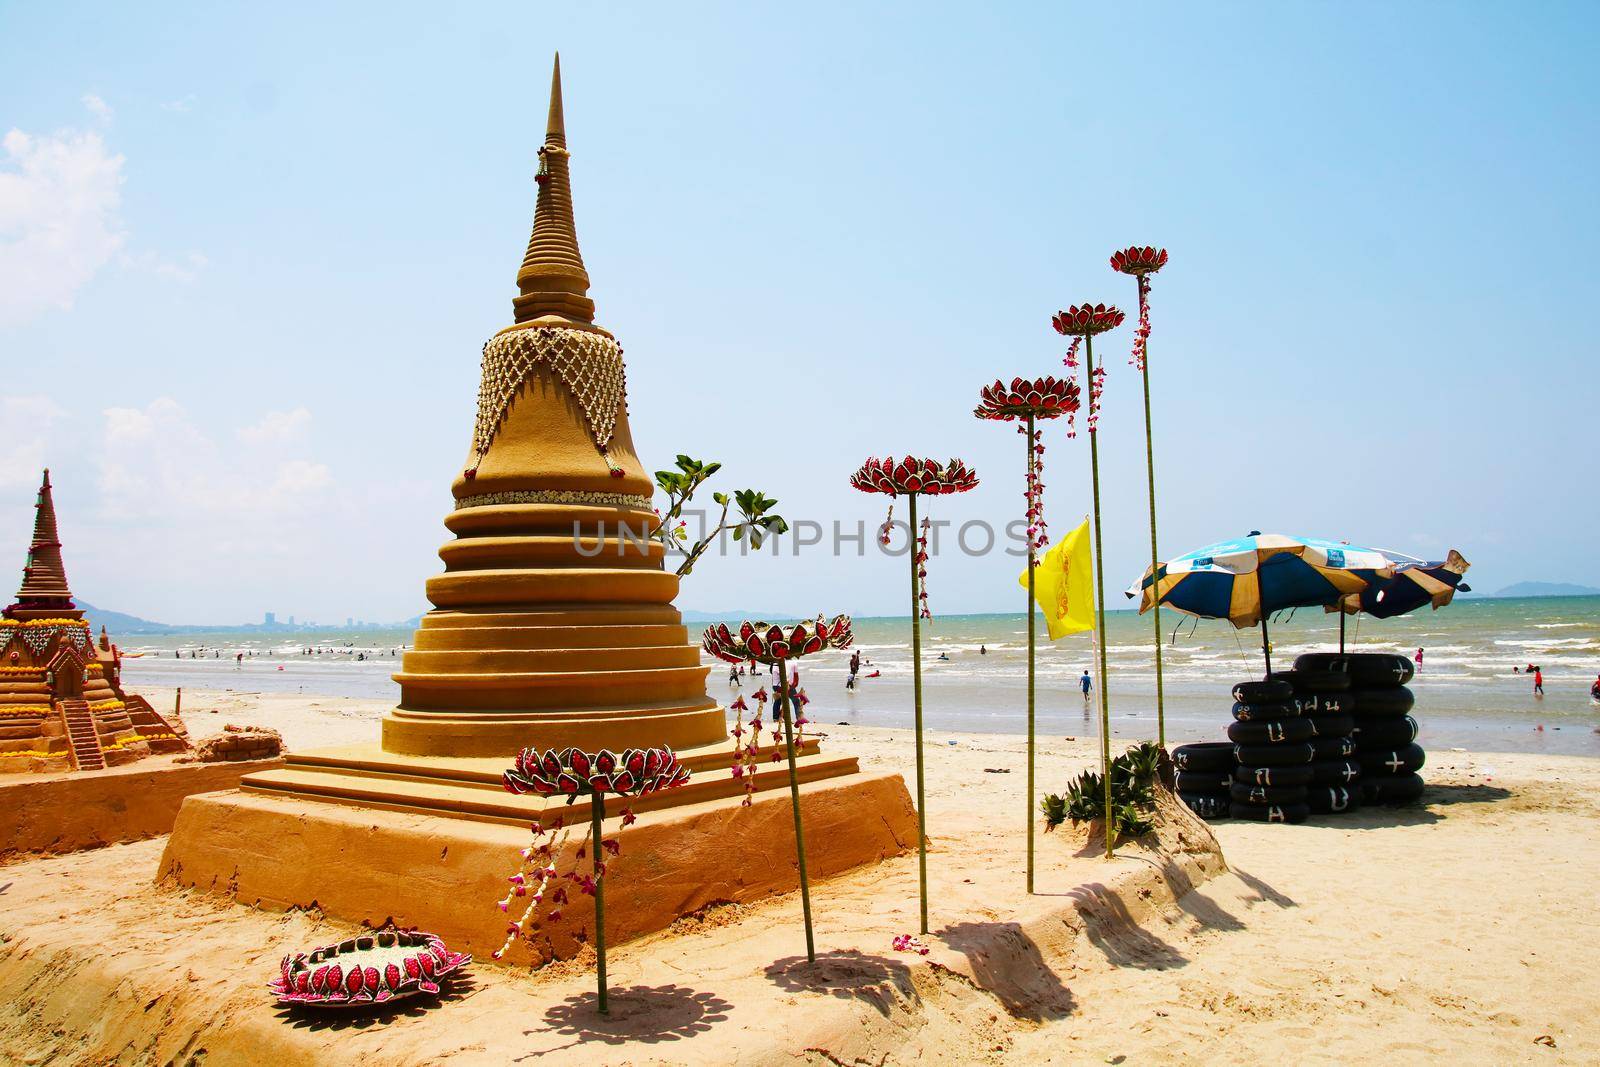 sand pagoda and seven lotus was carefully built, and beautifully decorated Songkran festival by Darkfox